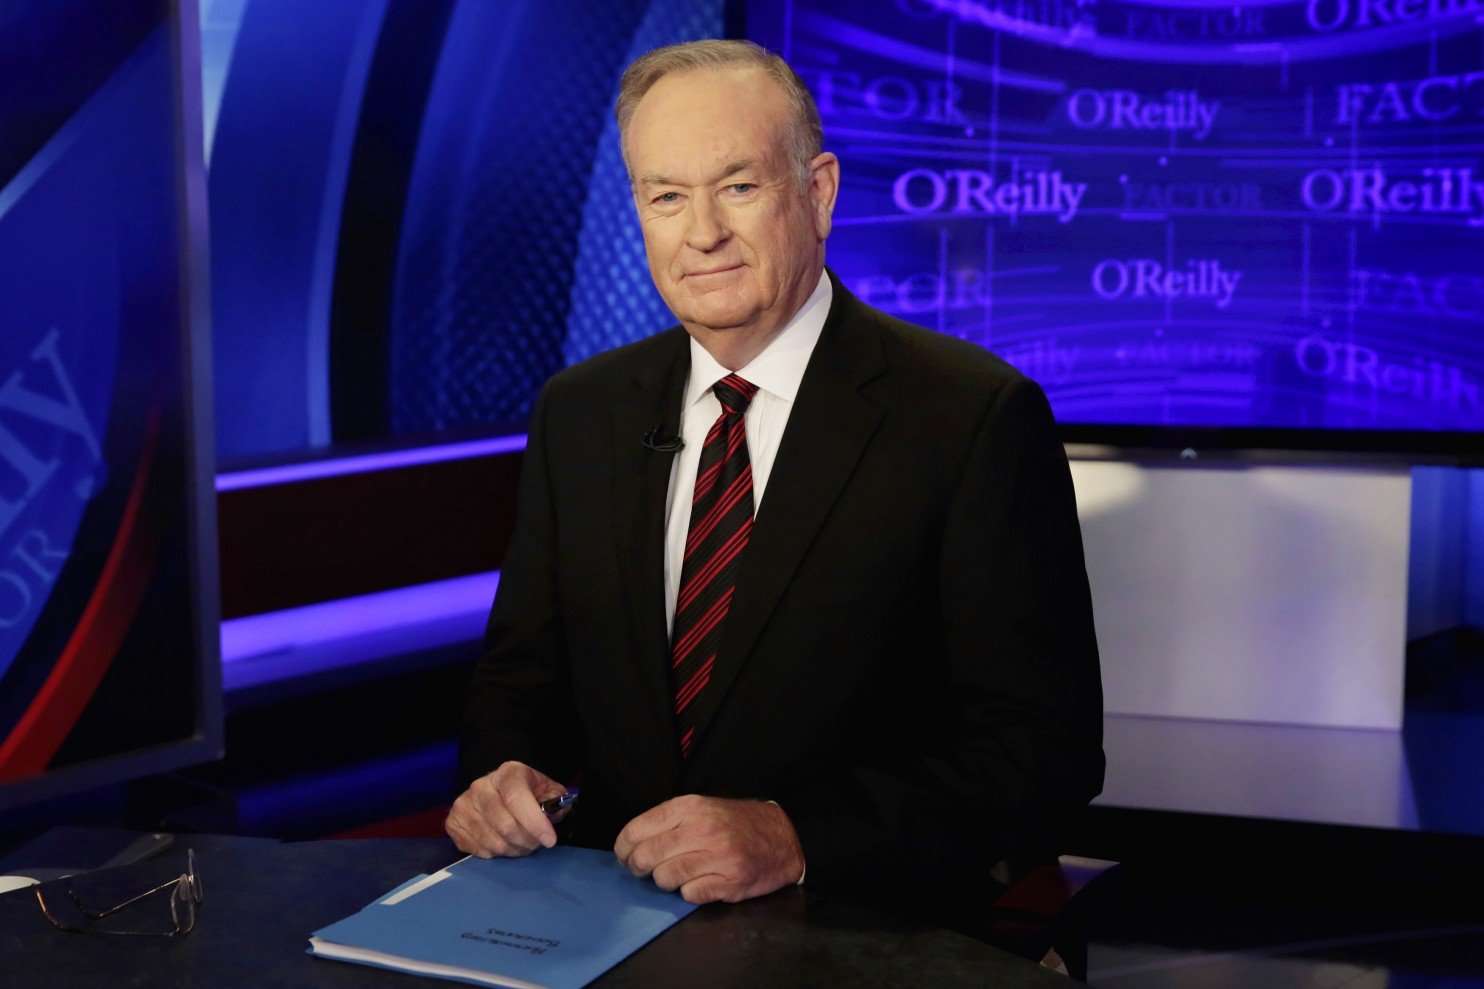 image for Bill O’Reilly’s Fox News career comes to a swift end amid growing sexual harassment claims